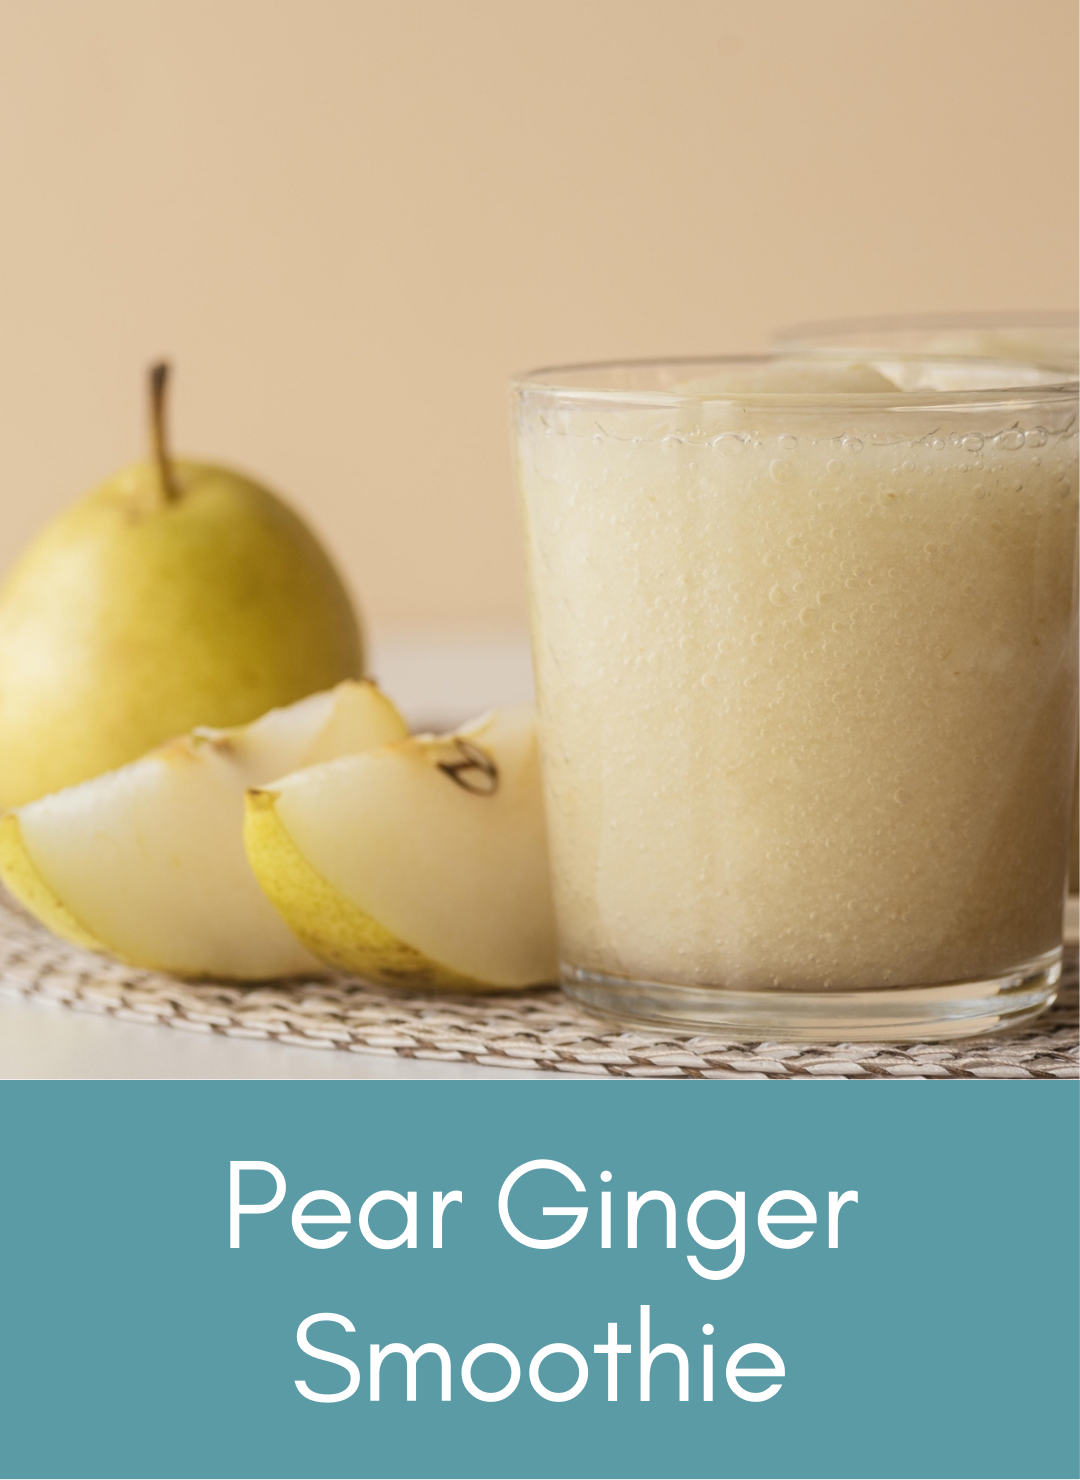 Whole food plant based vegan ginger pear smoothie Picture with link to recipe